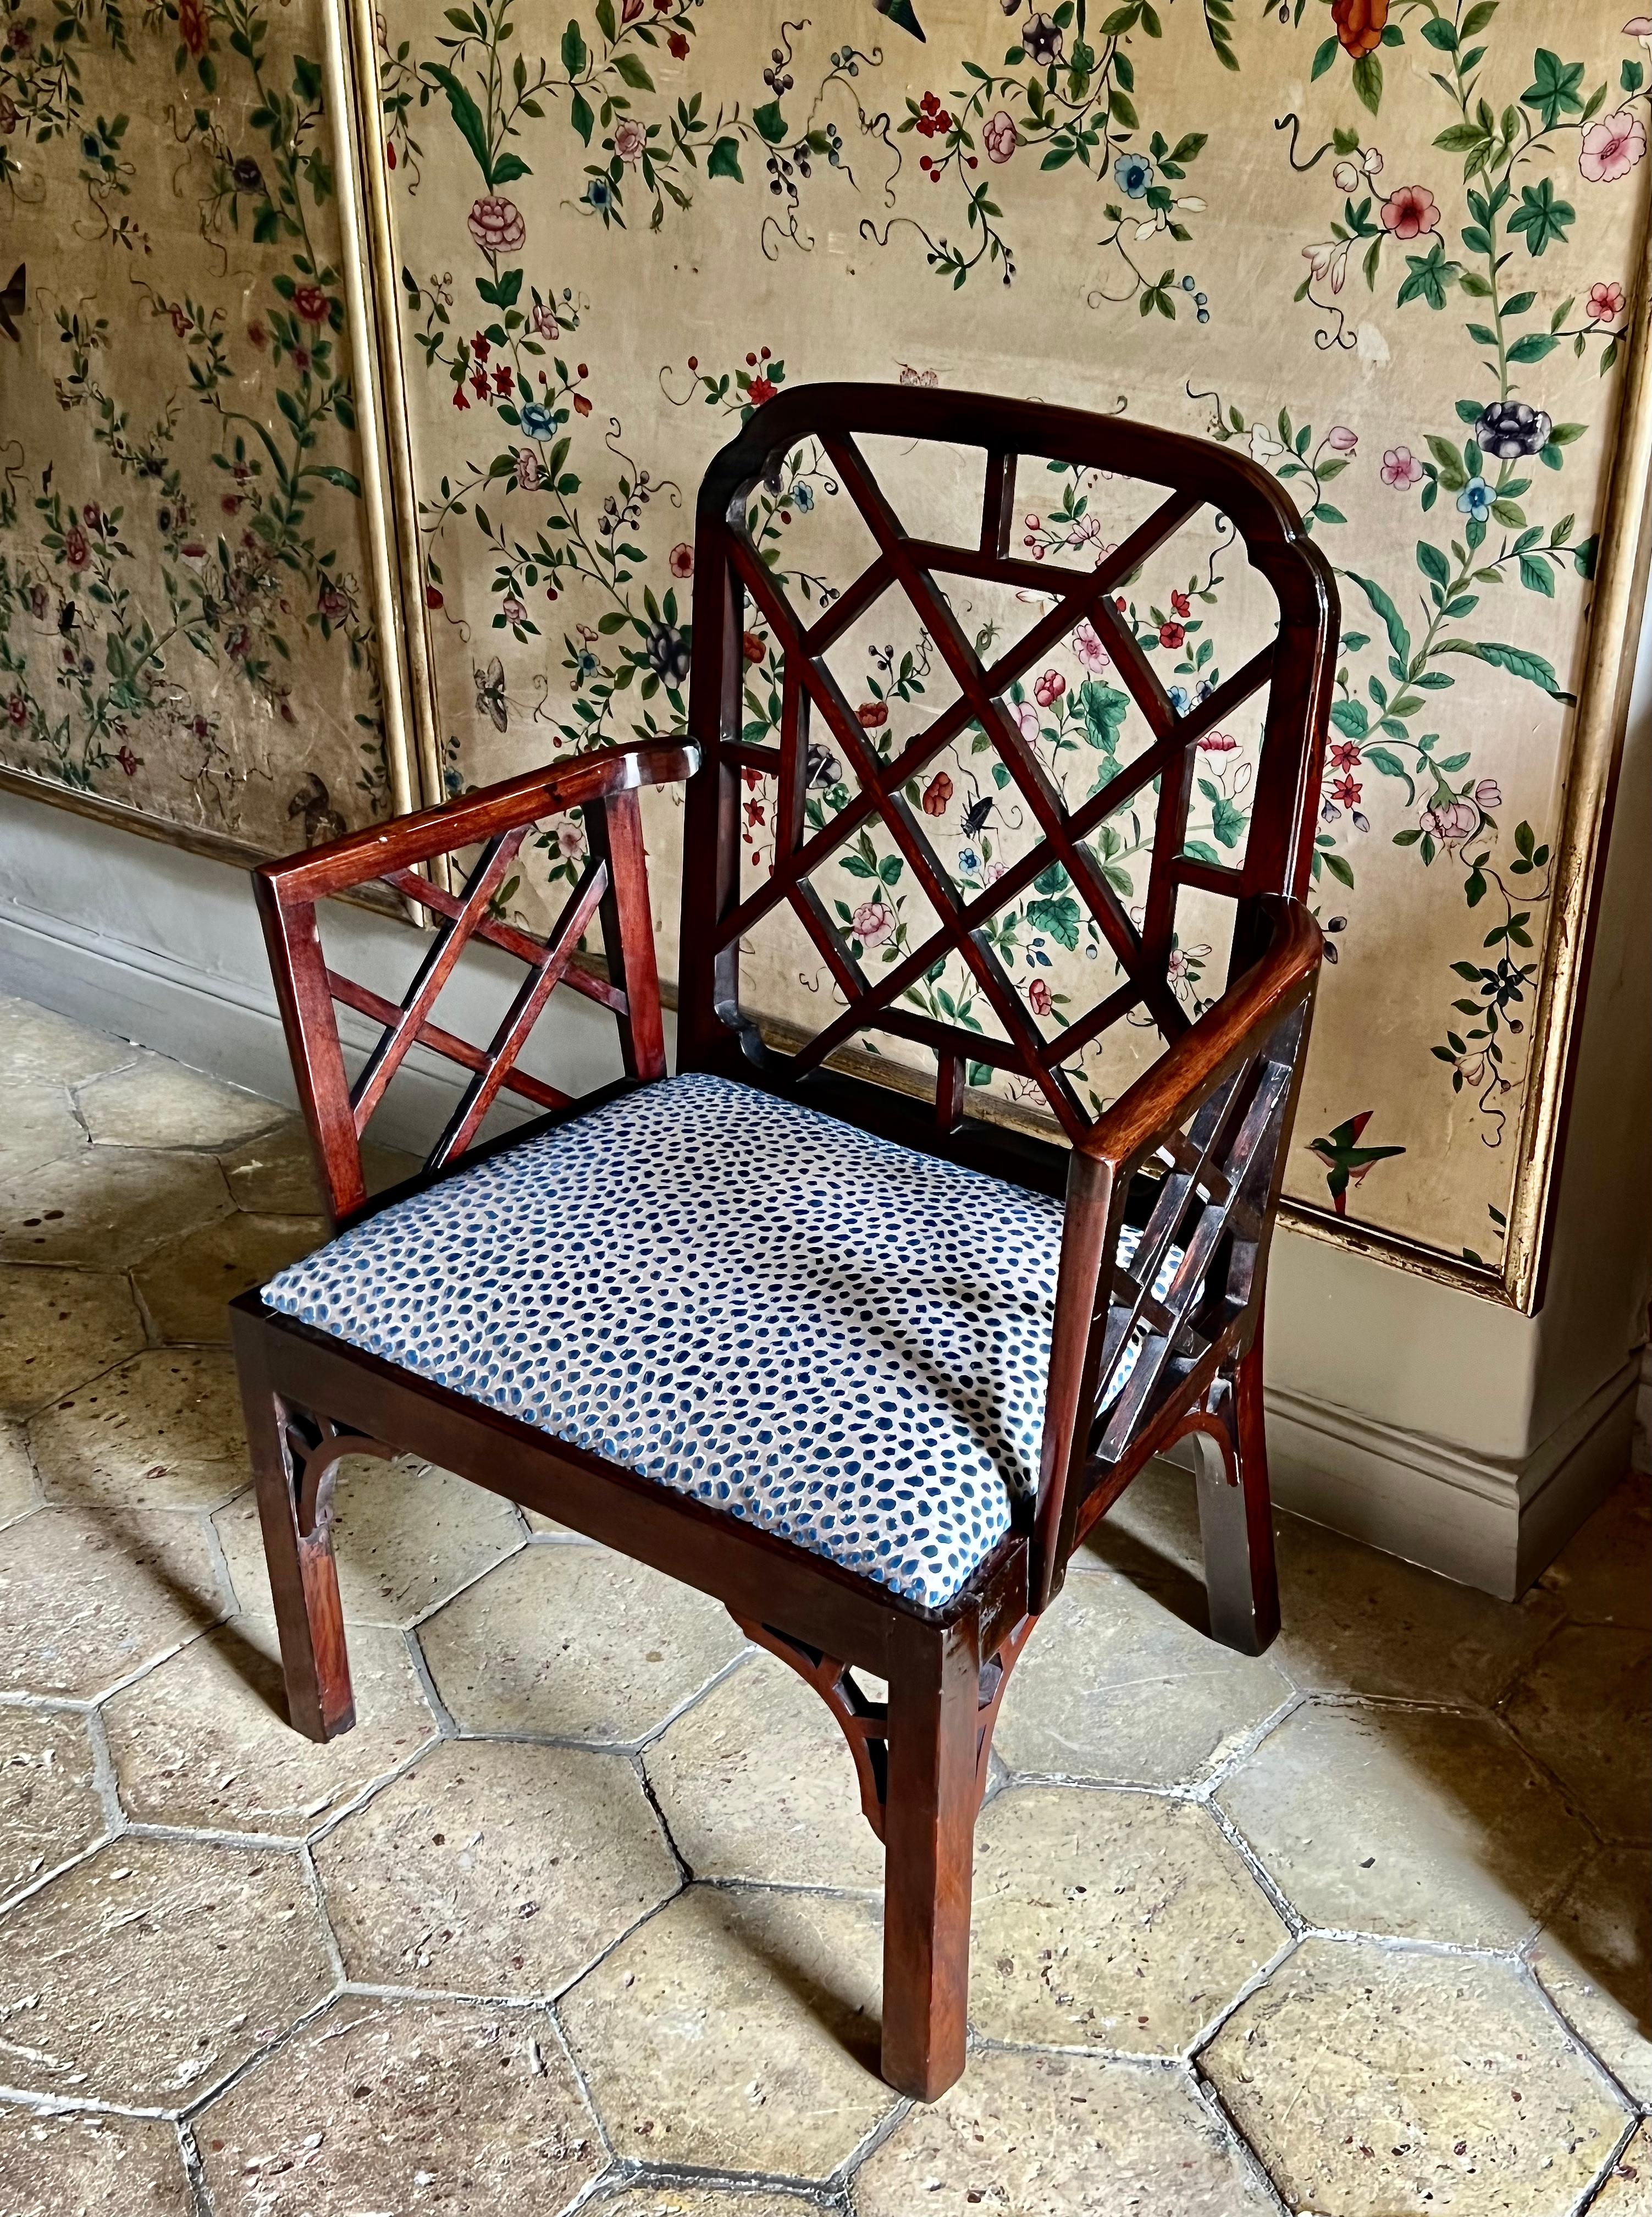 An 18th-century mahogany Cockpen armchair. George III period, ca 1762.

Rare and sophisticated, this antique Cockpen armchair retains its chinoiserie open-fretwork frame and angle brackets.

Some minor historic restorations entirely commensurate